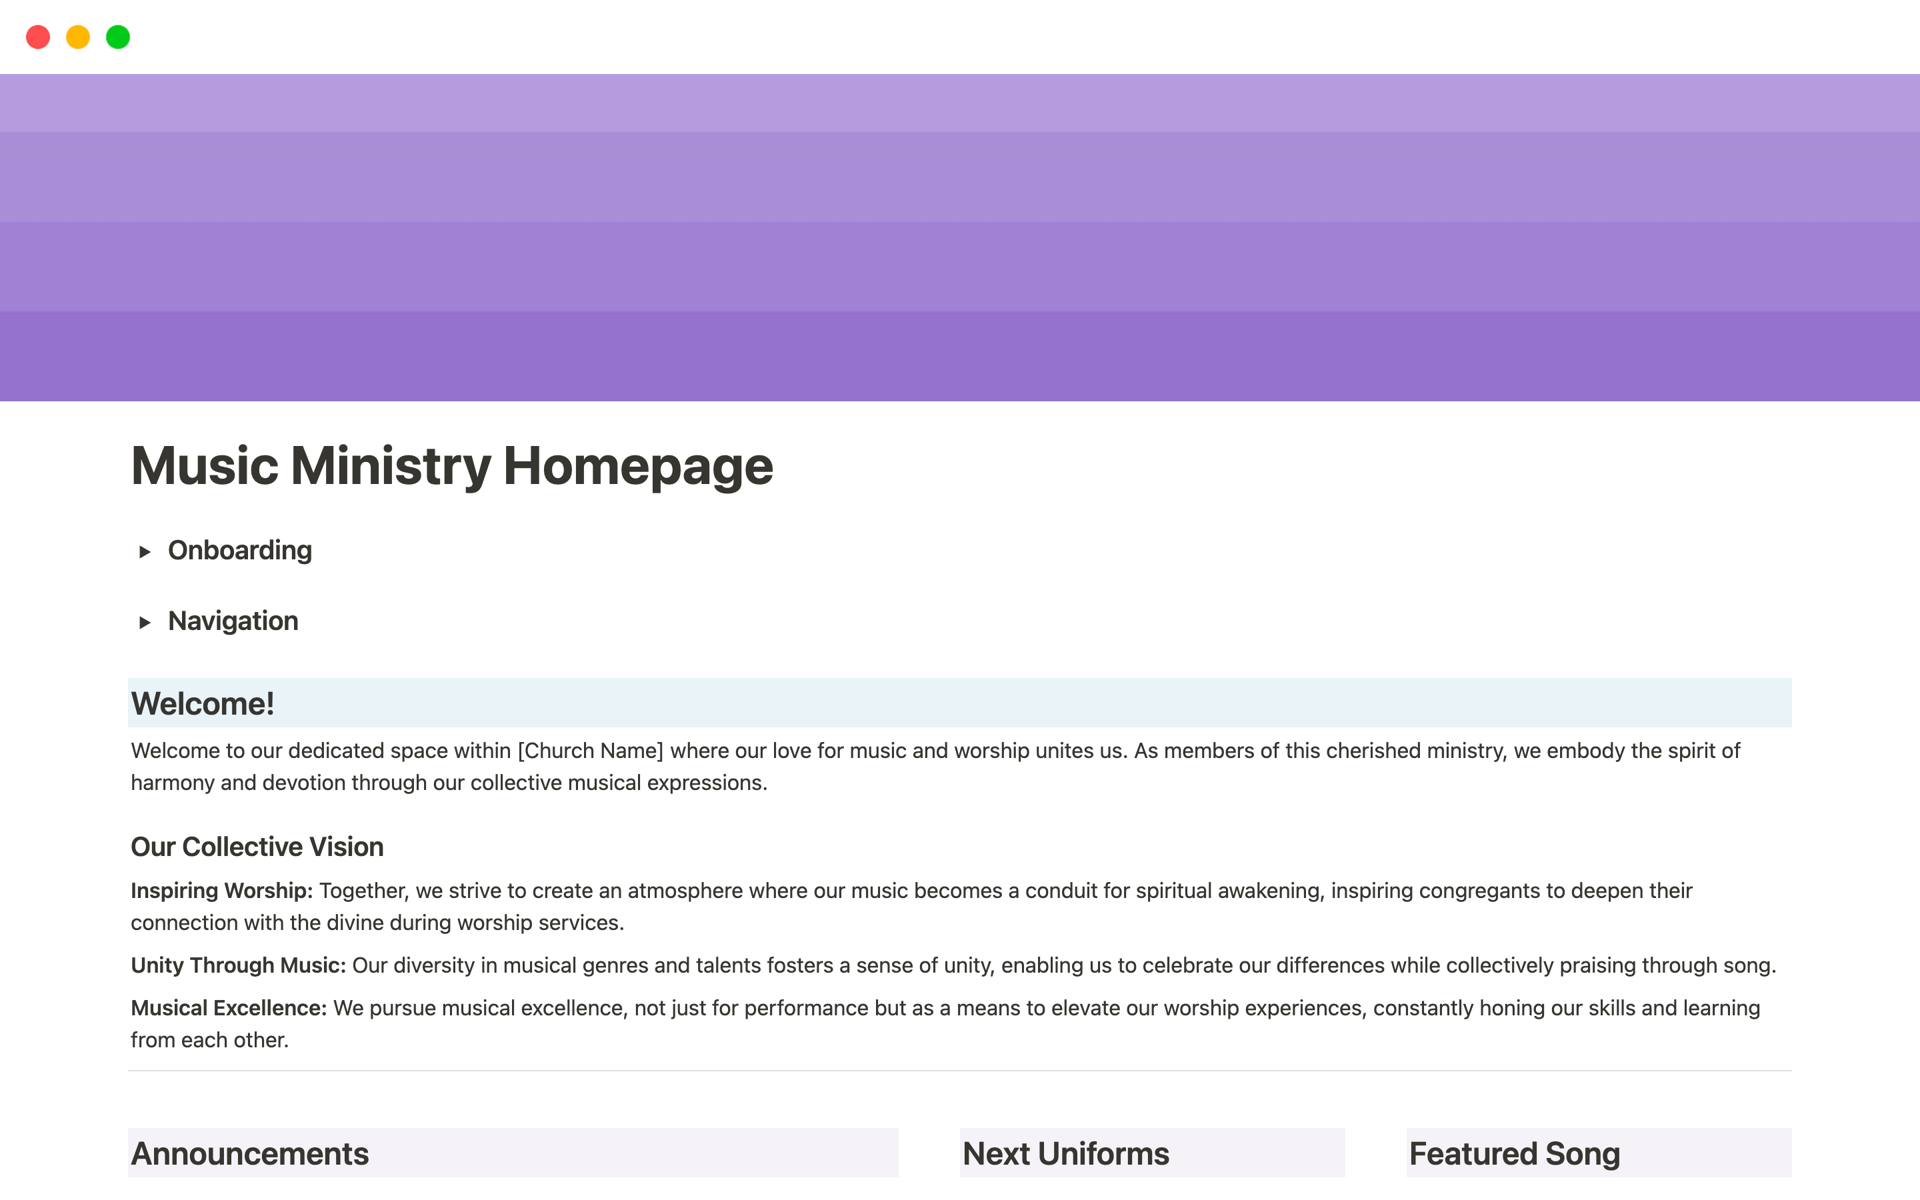 Revolutionize your church music department with the Music Ministry Homepage template! Effortlessly manage announcements, uniform arrangements, song lists, and member directories in one comprehensive tool. Streamline operations and elevate your music team's efficiency today!